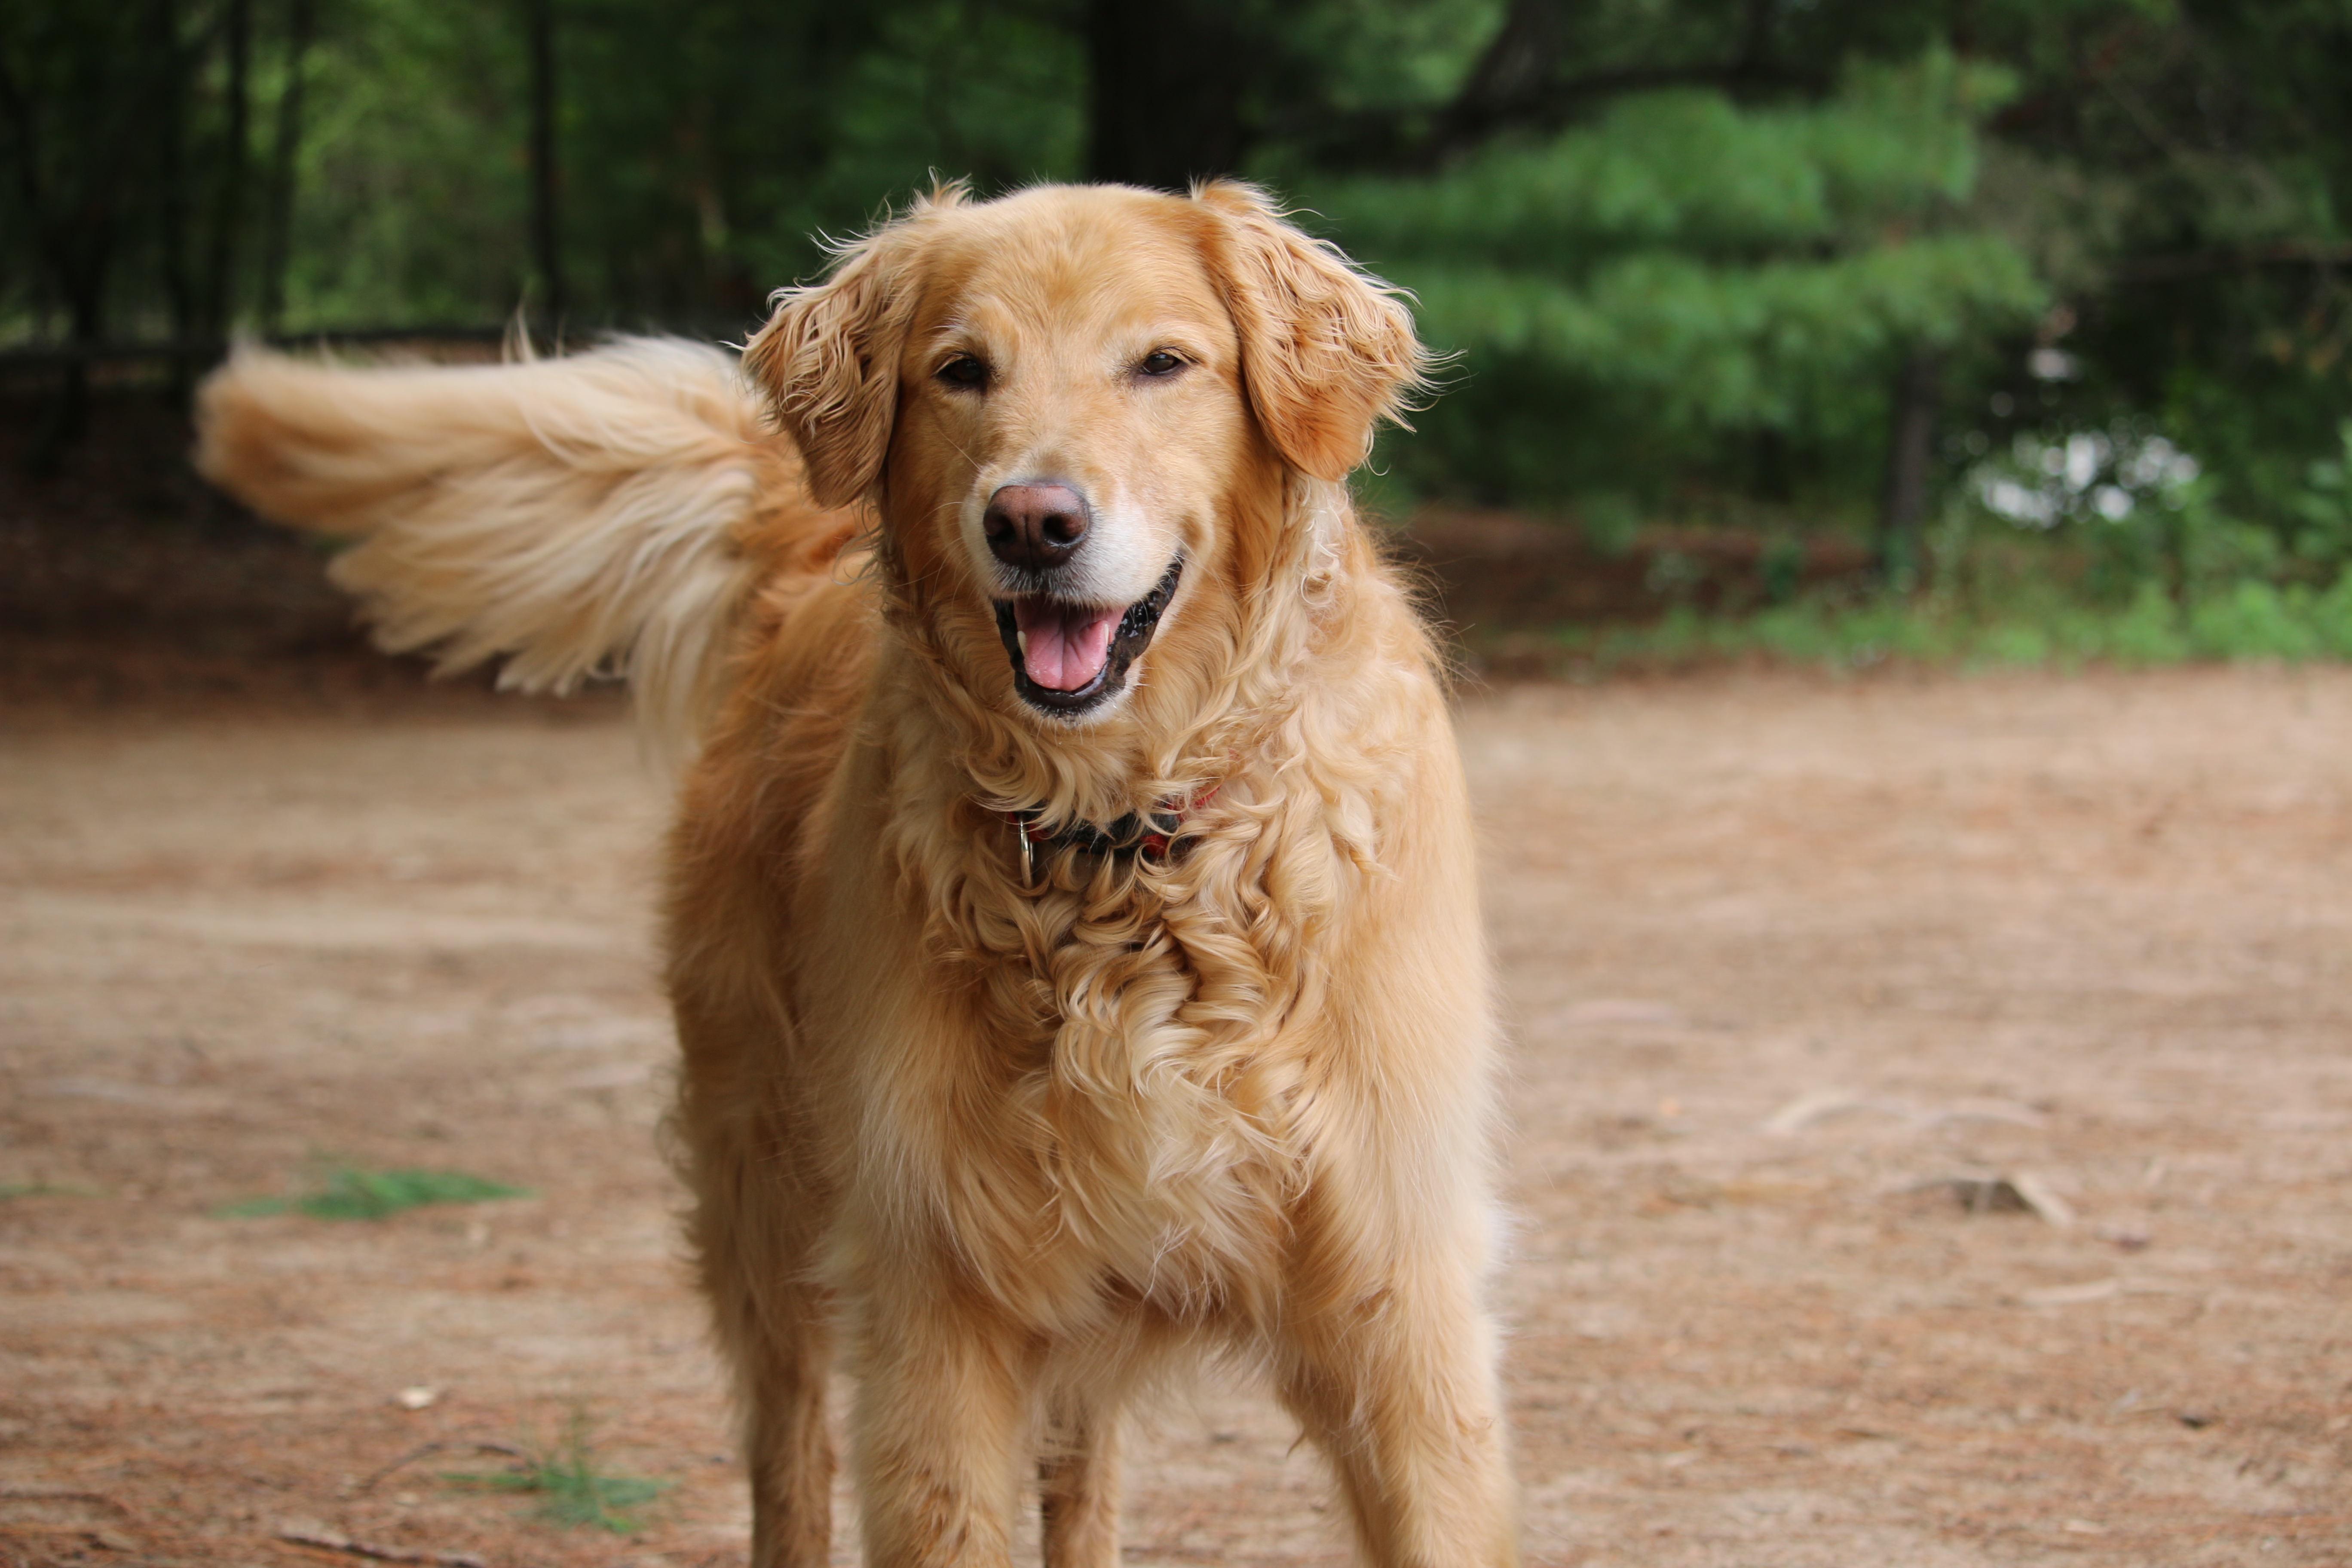 6 Immediate Steps to Take When You Discover Fleas or Ticks on Your Dog